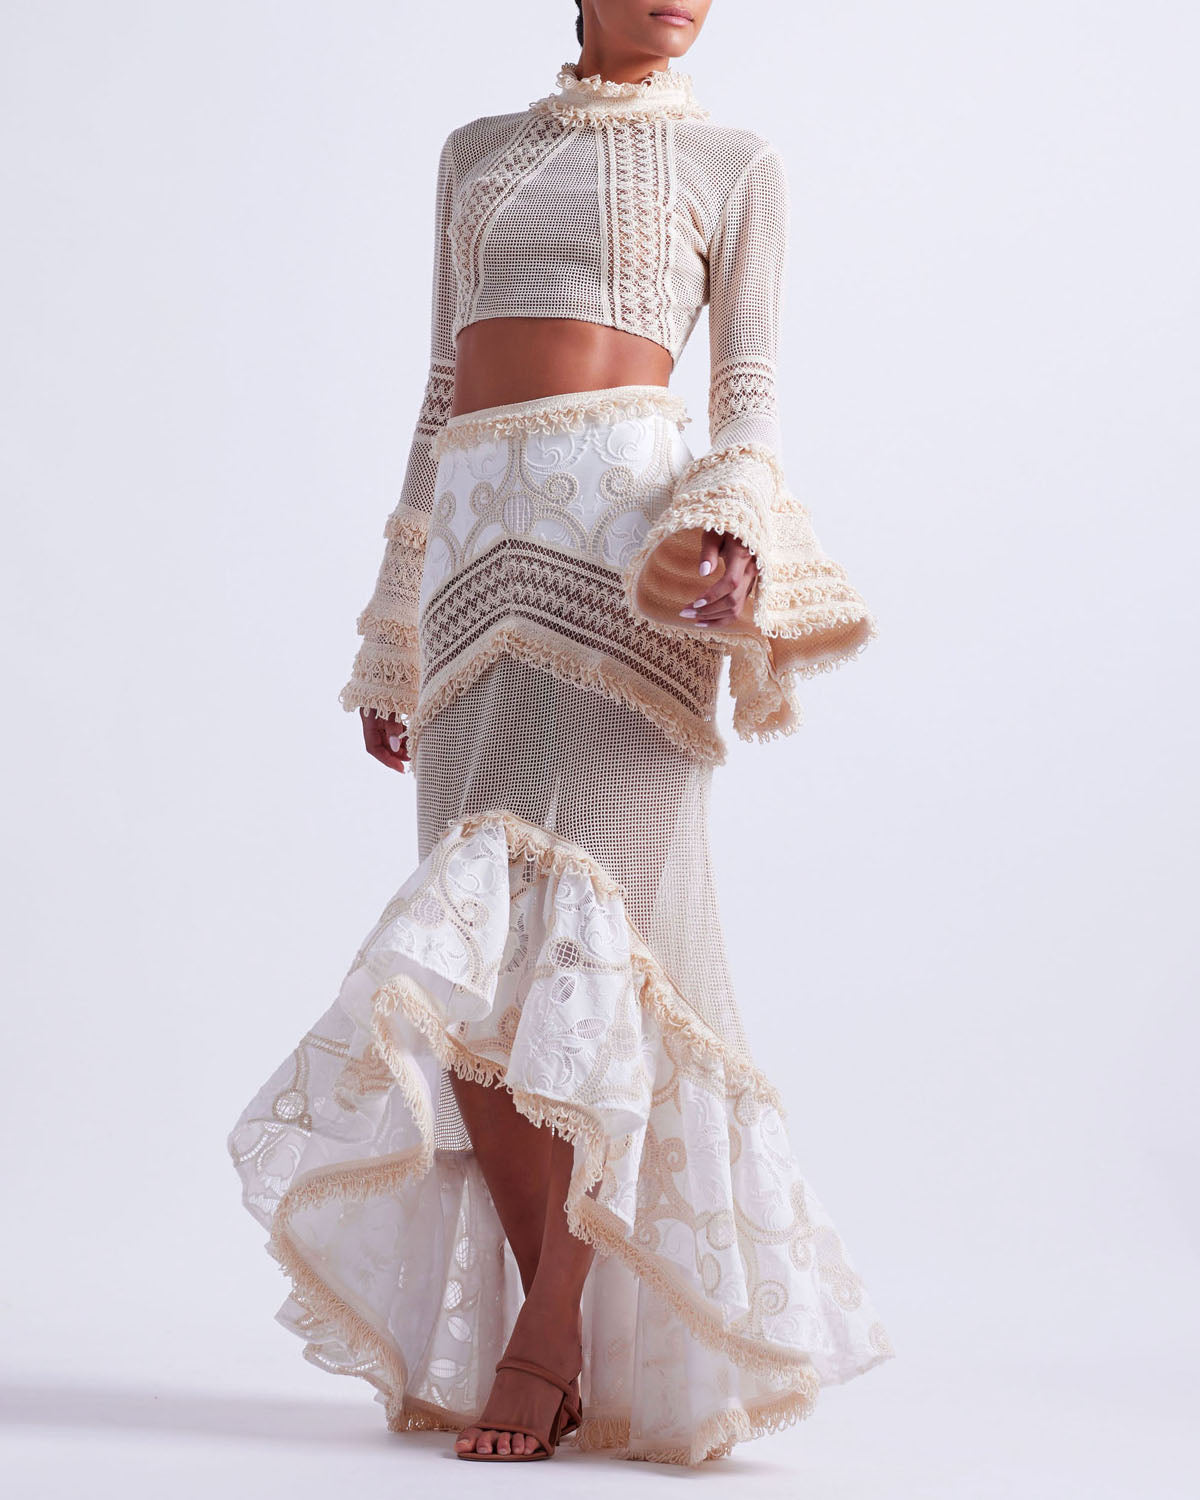 Fluted Lace Maxi Skirt (RUNWAY)